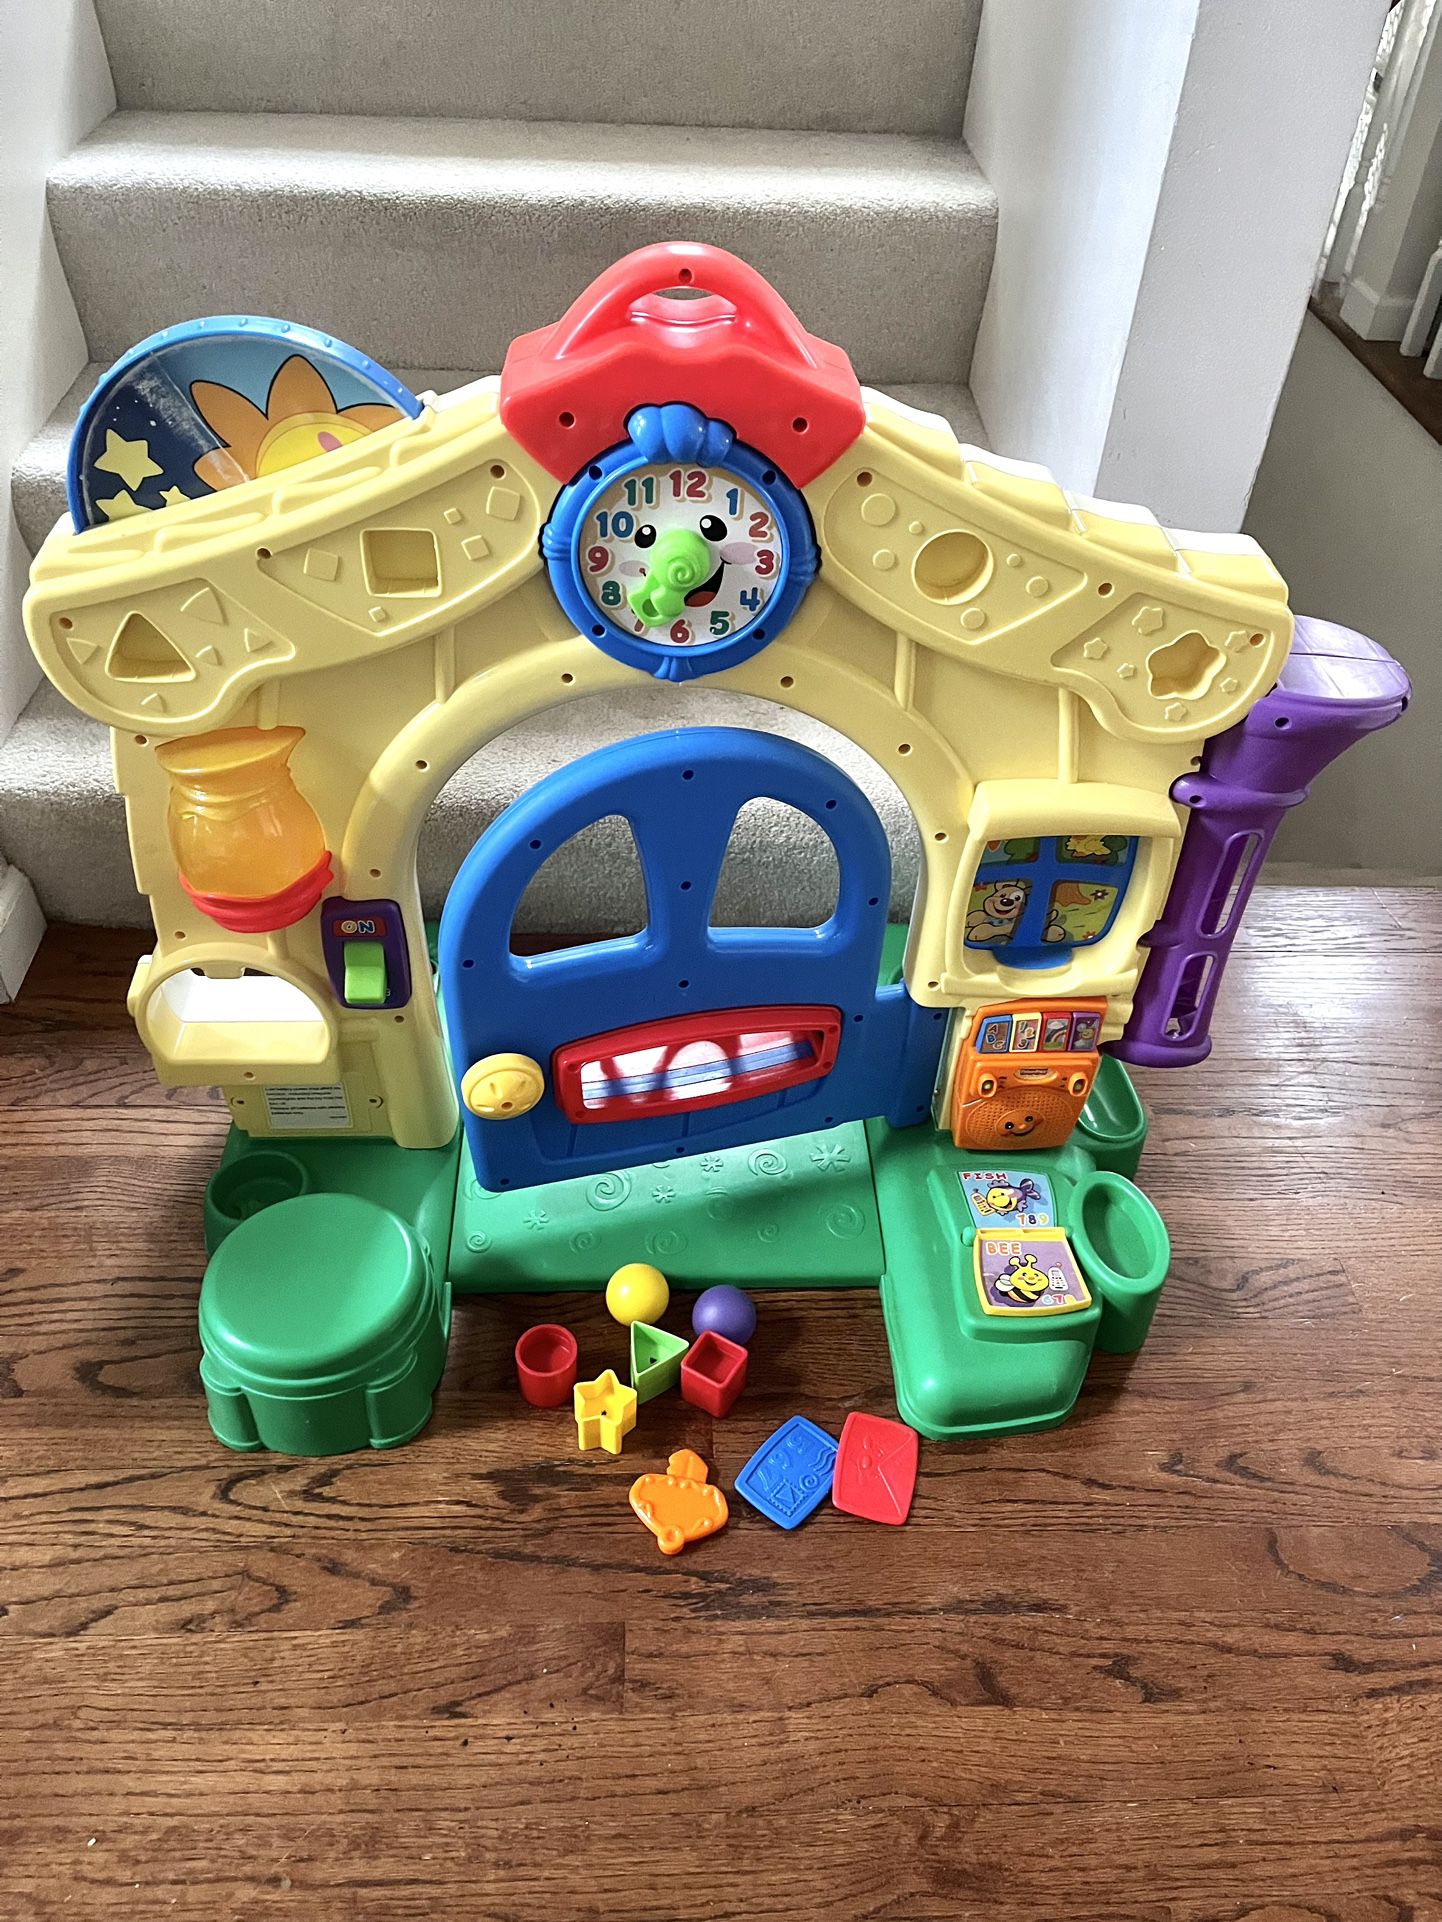 Double Sided Fisher Price Laugh & Learn Educational Door House With Mail, Shapes, Balls & Key. Has Music And Lights! 